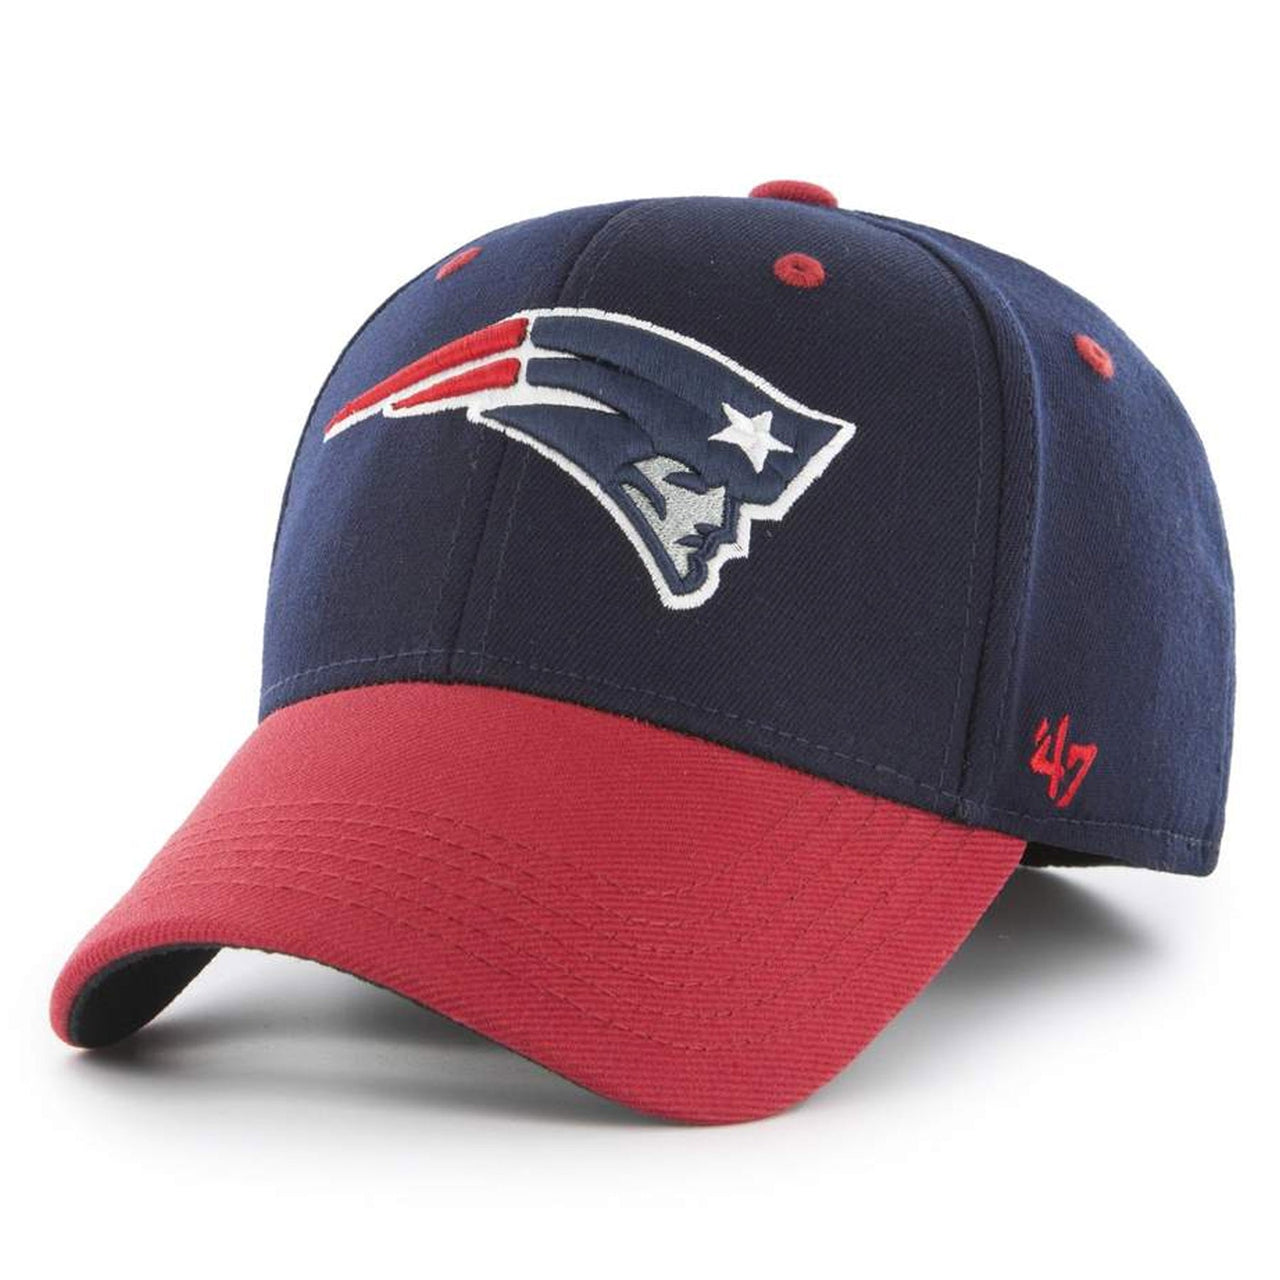 The new england patriots one size fits all stretch fit cap has a navy blue structured crowna nd a red bent brim with the new england patriots logo embroidered on the front in red, white, and blue